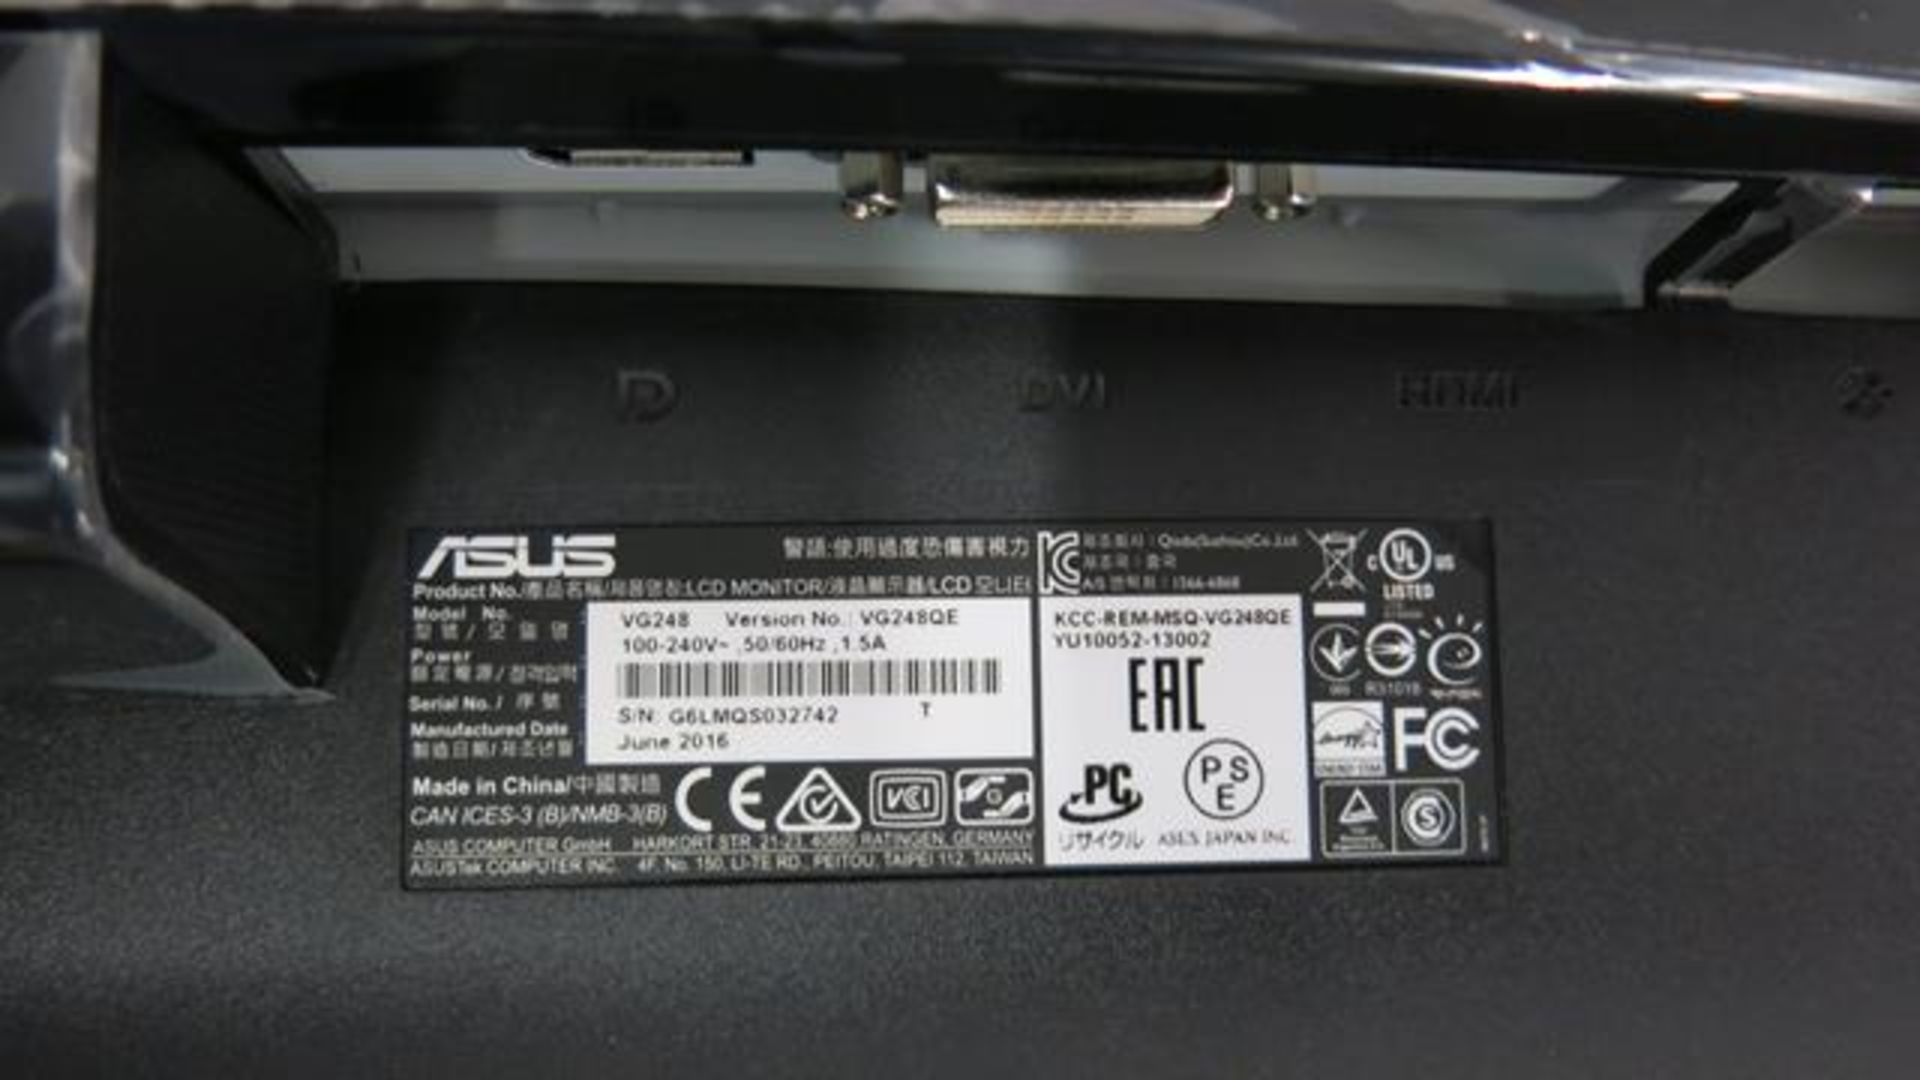 ASUS, VG248QE, 24", 3D CAPABLE, WIDESCREEN COMPUTER MONITOR (TAG#329) - Image 2 of 2